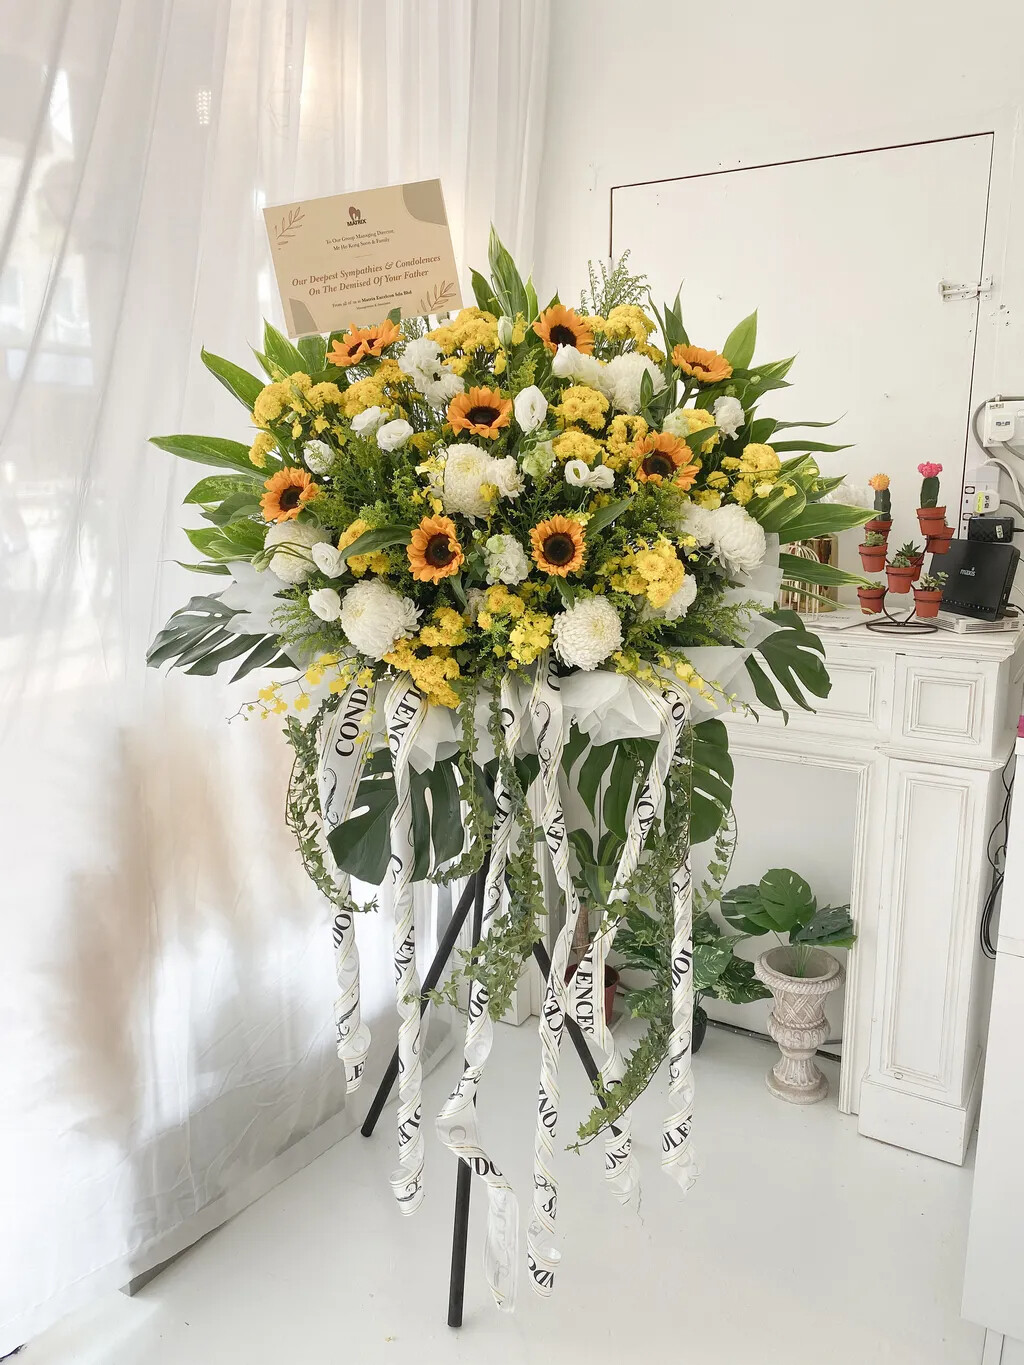 Froze Condolence Flower Stand (By: Temptation Florist from Seremban)